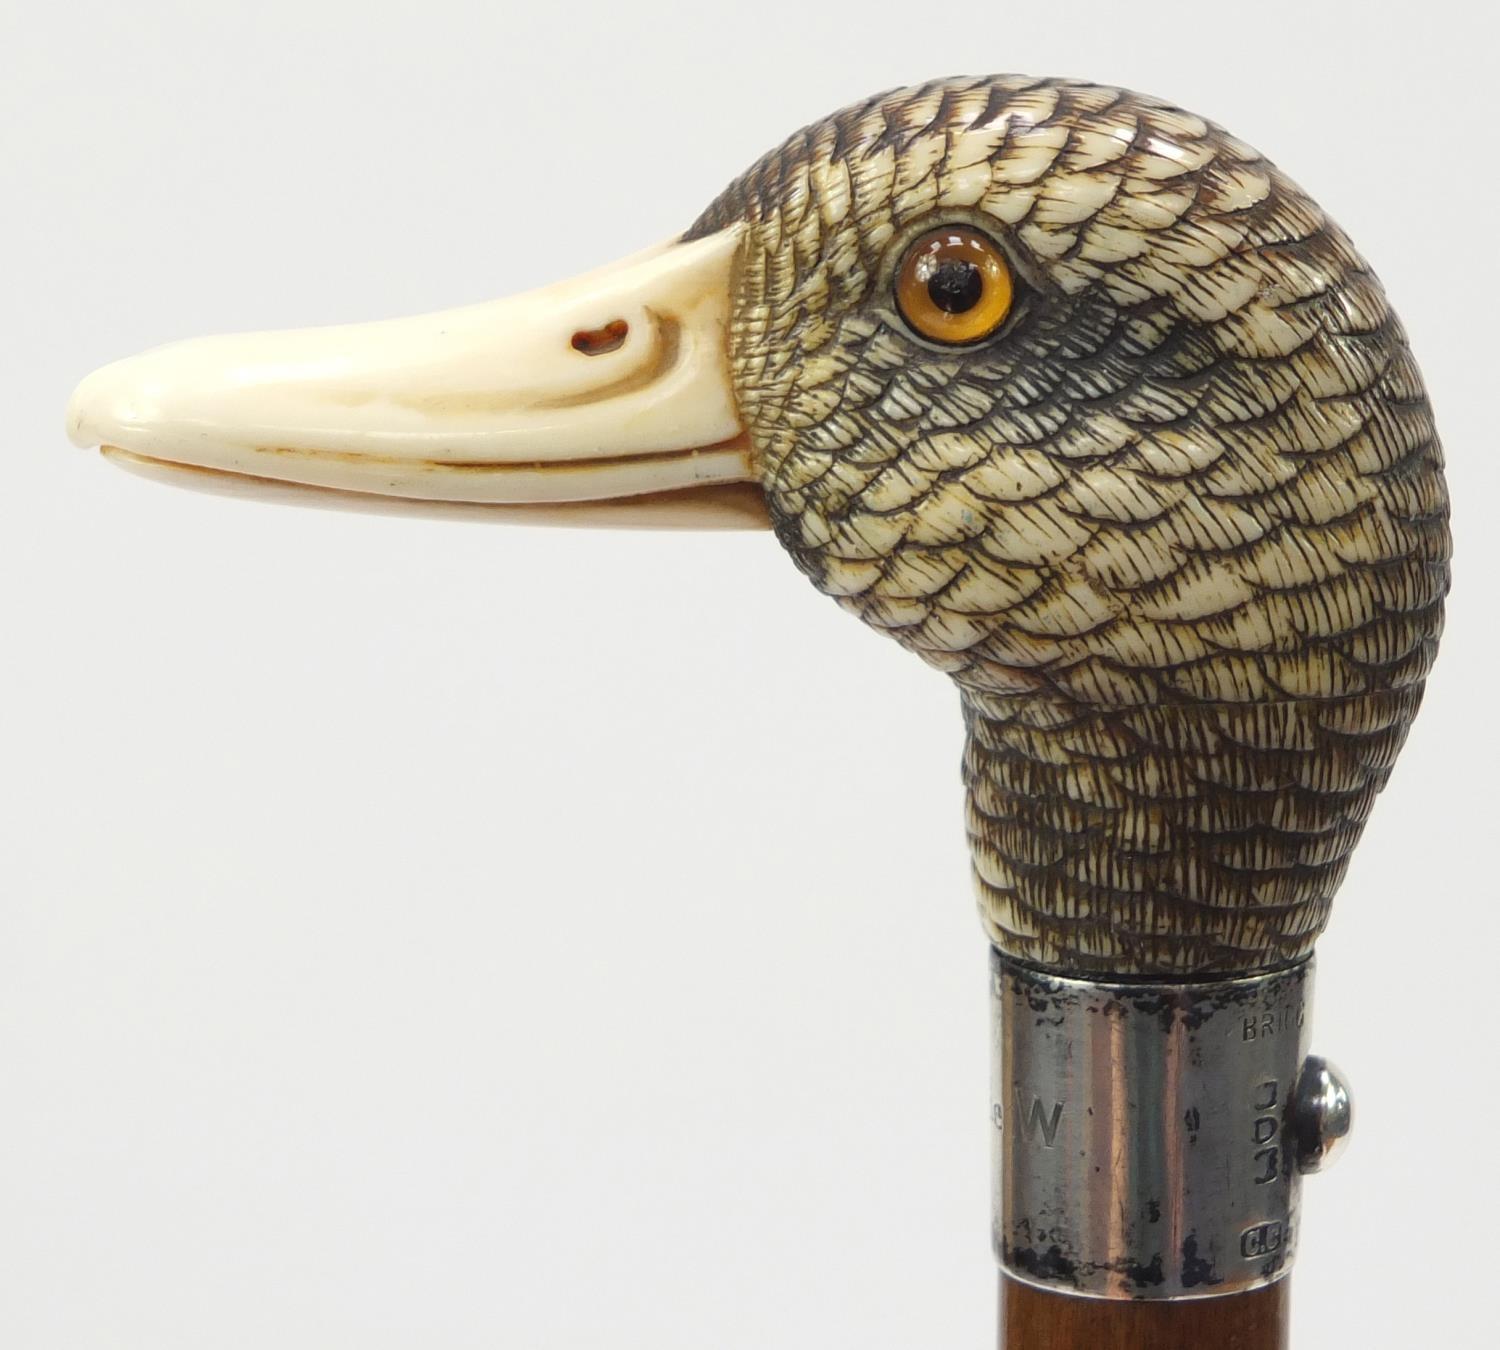 19th century parasol with carved ivory ducks head handle by Brigg & Sons, the ducks head having - Image 3 of 13